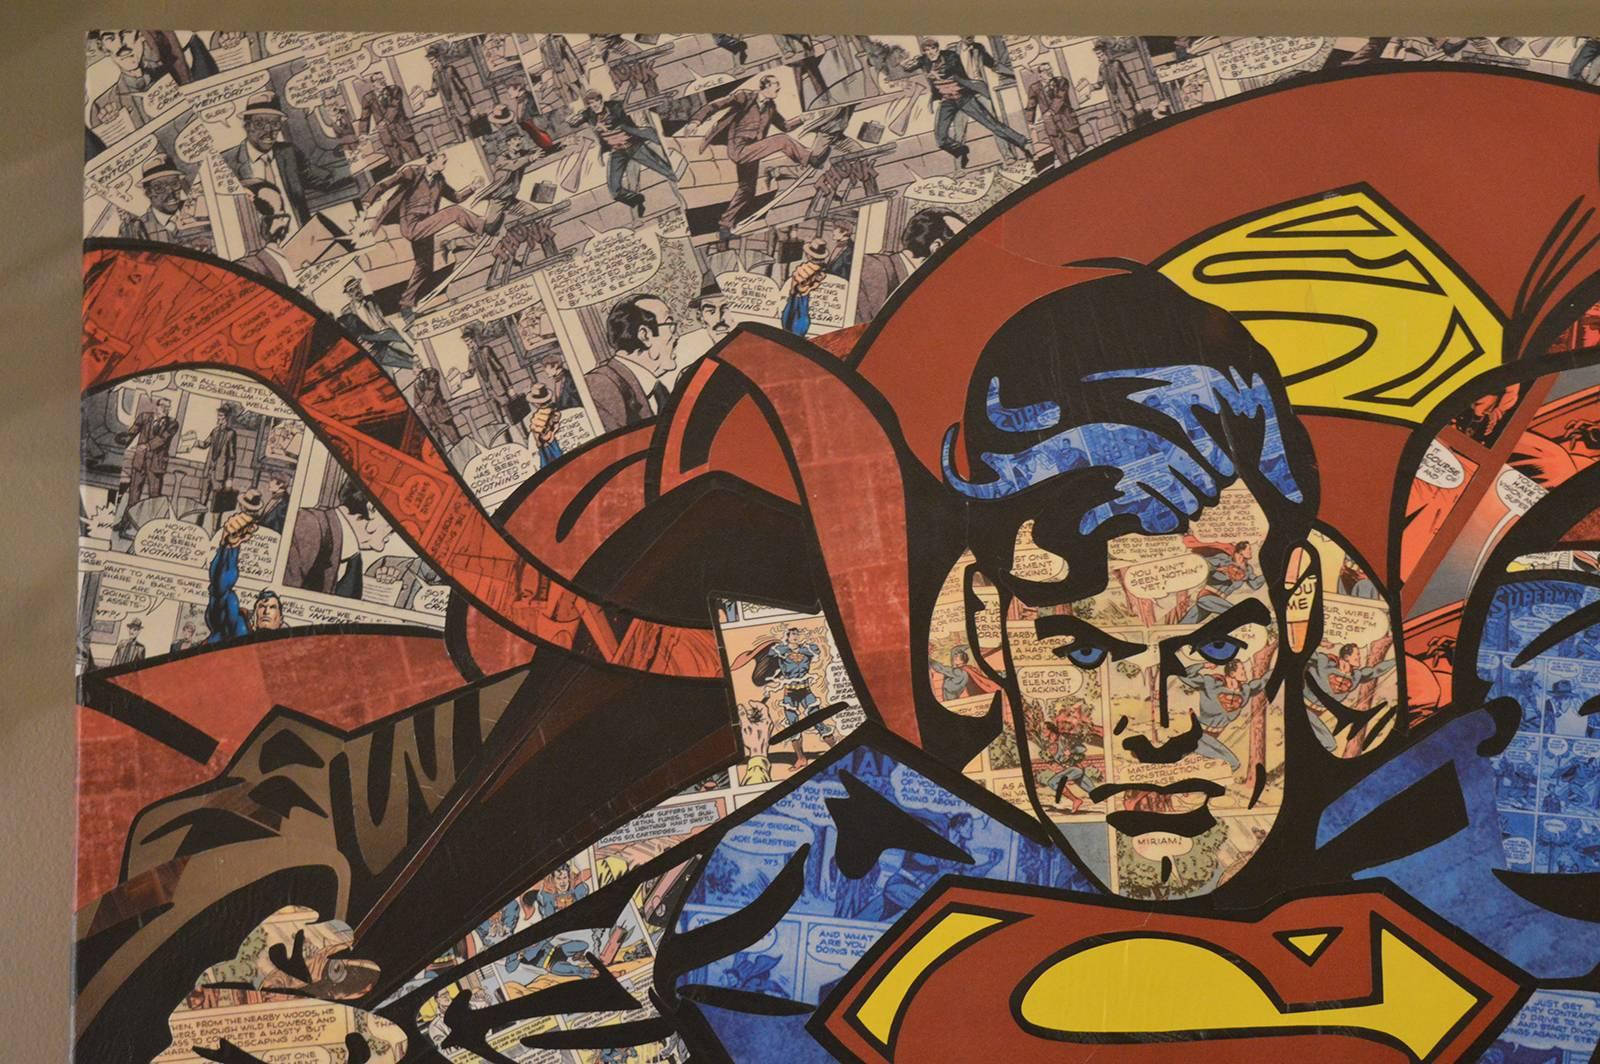 Super man Man of Steel Pop Art piece by Anabel Ruiz. Her art is mixed media with paint on Wonder Woman comics. Signed in the bottom left corner.